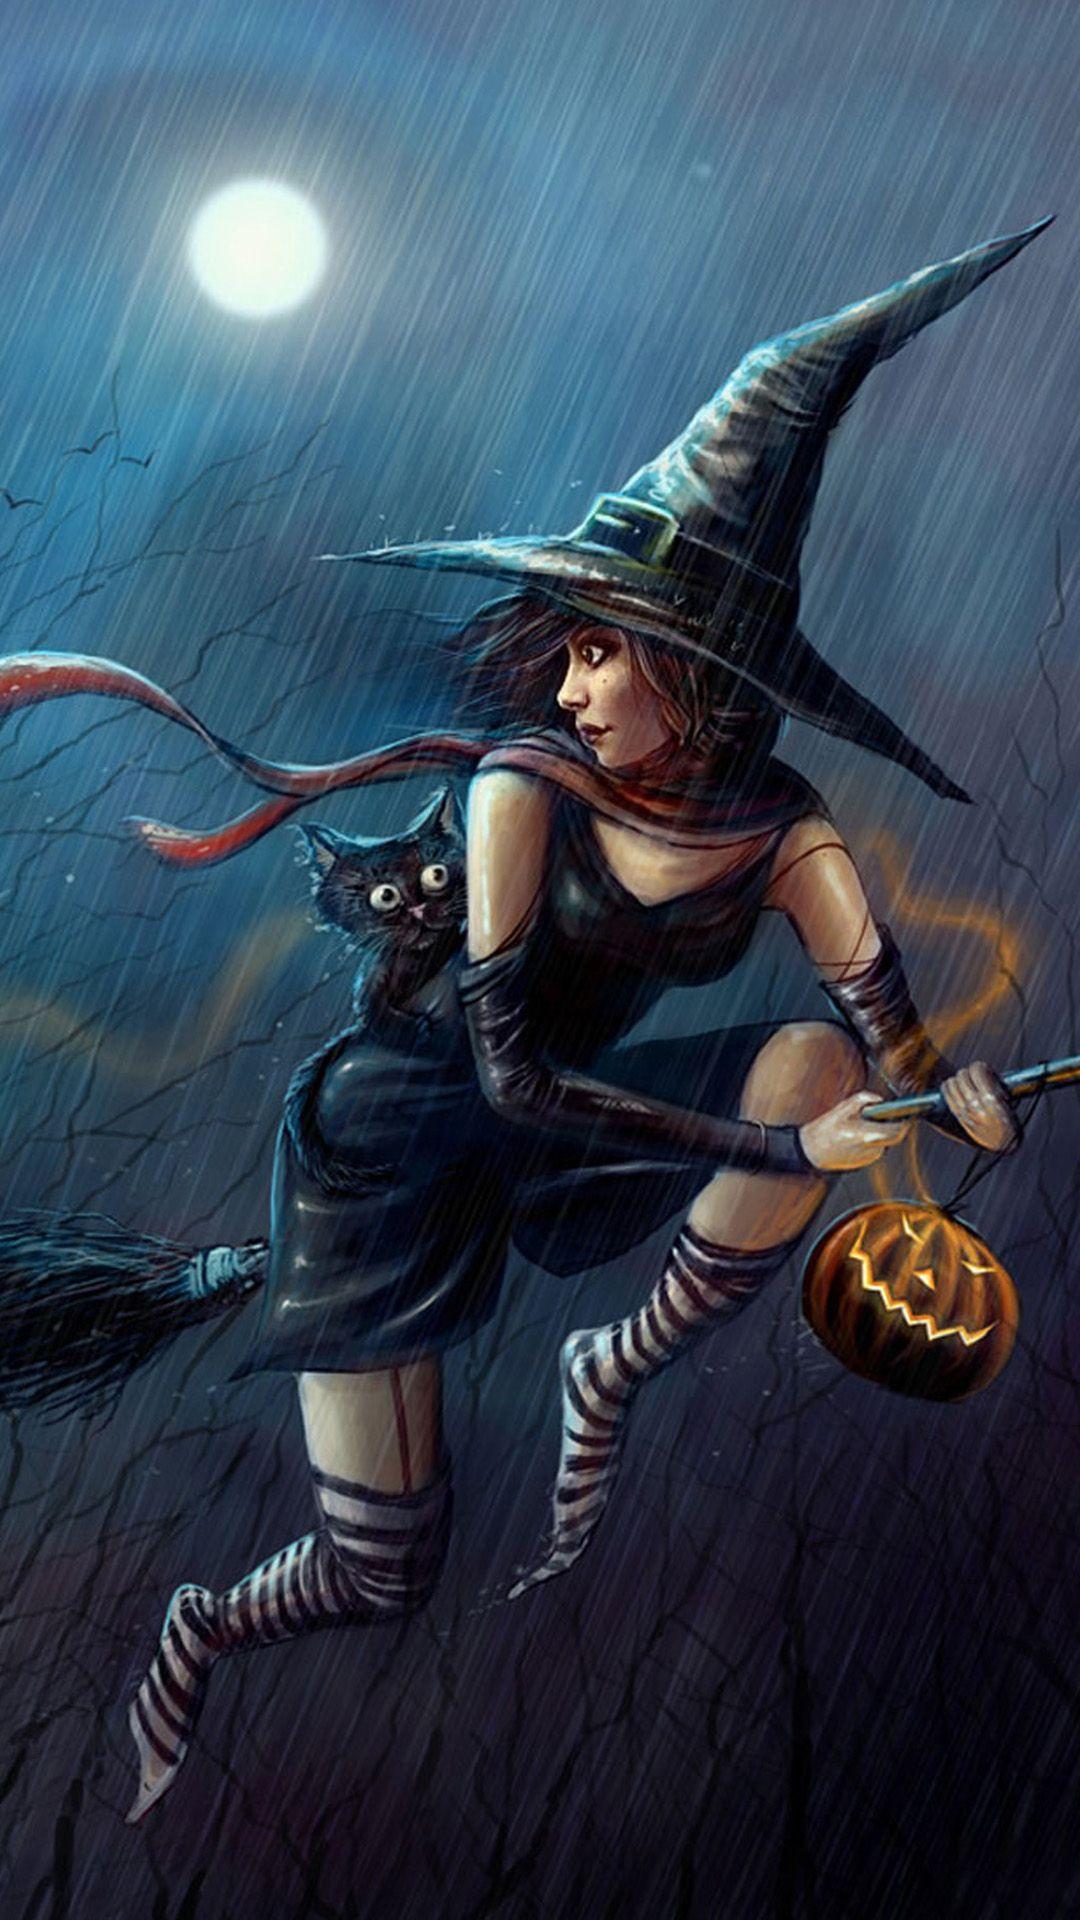 evil witch wallpaper